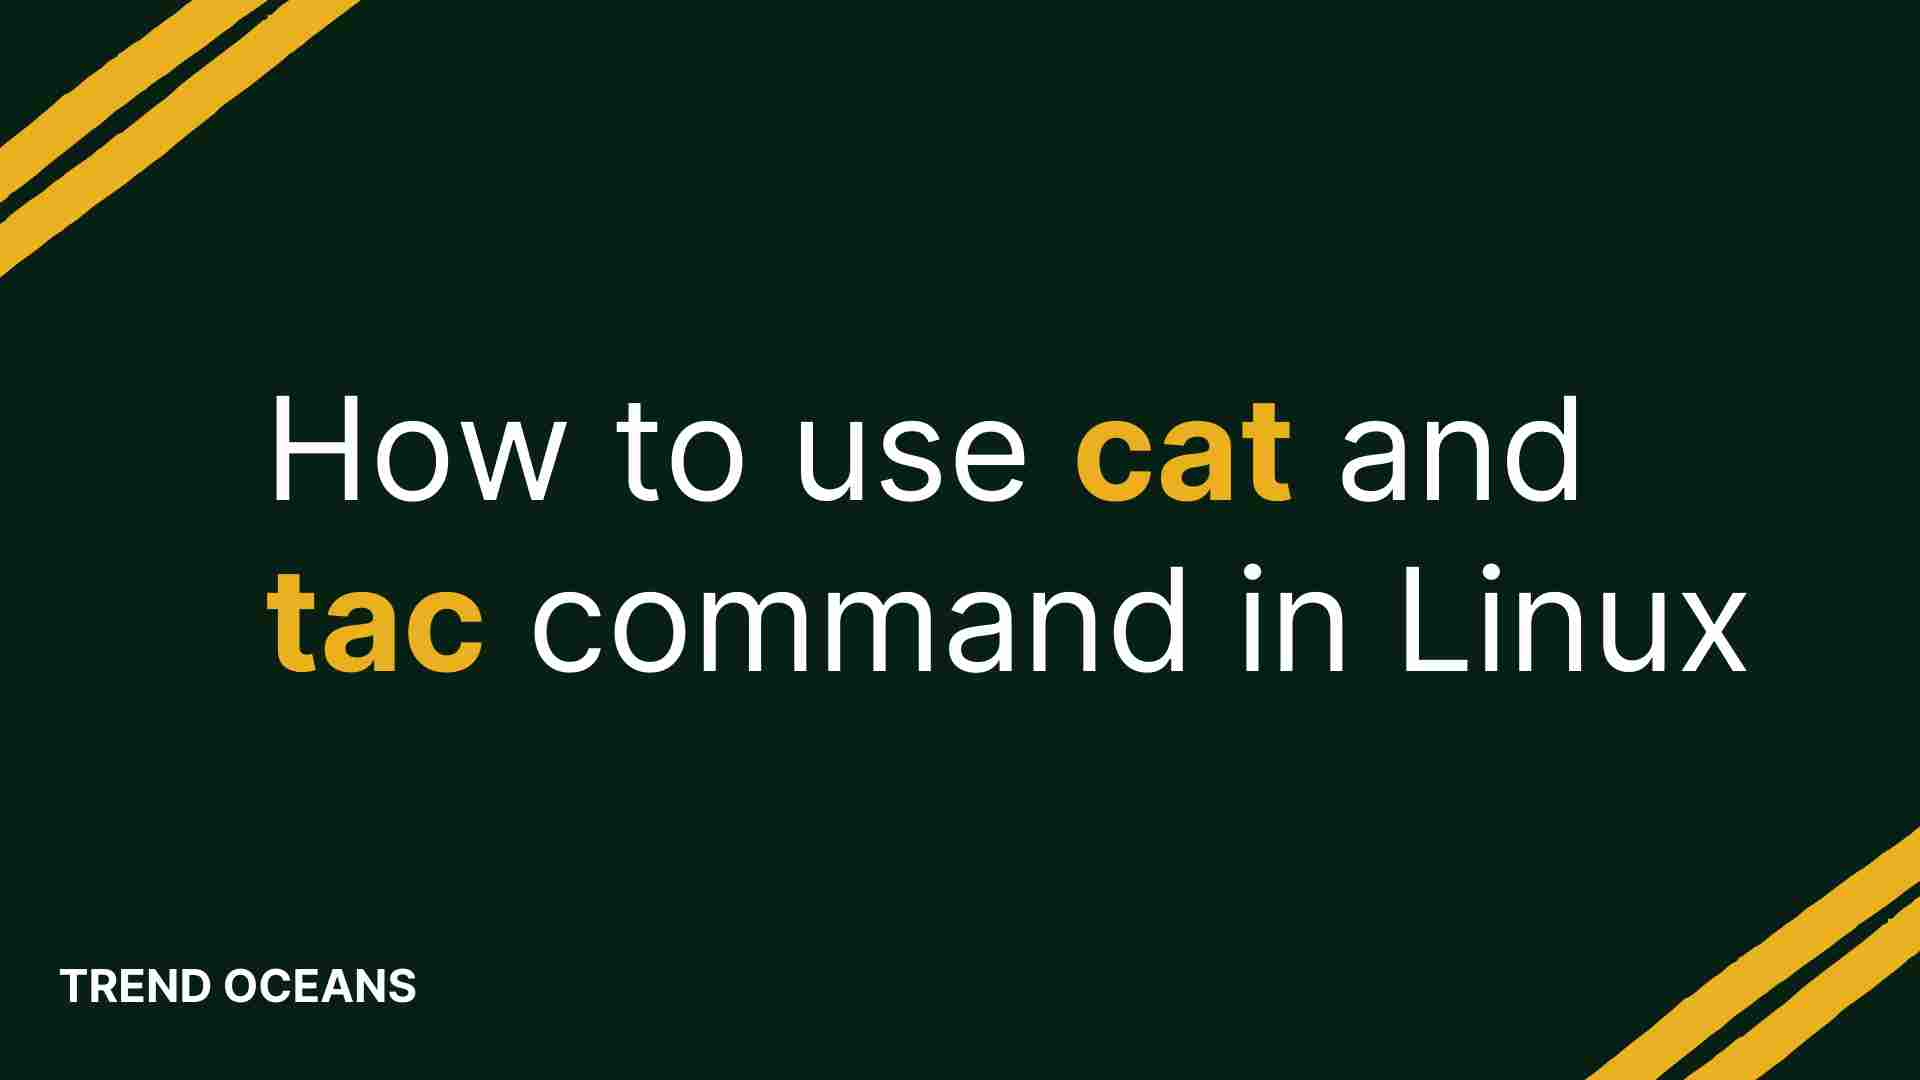 How to use cat and tac command in Linux